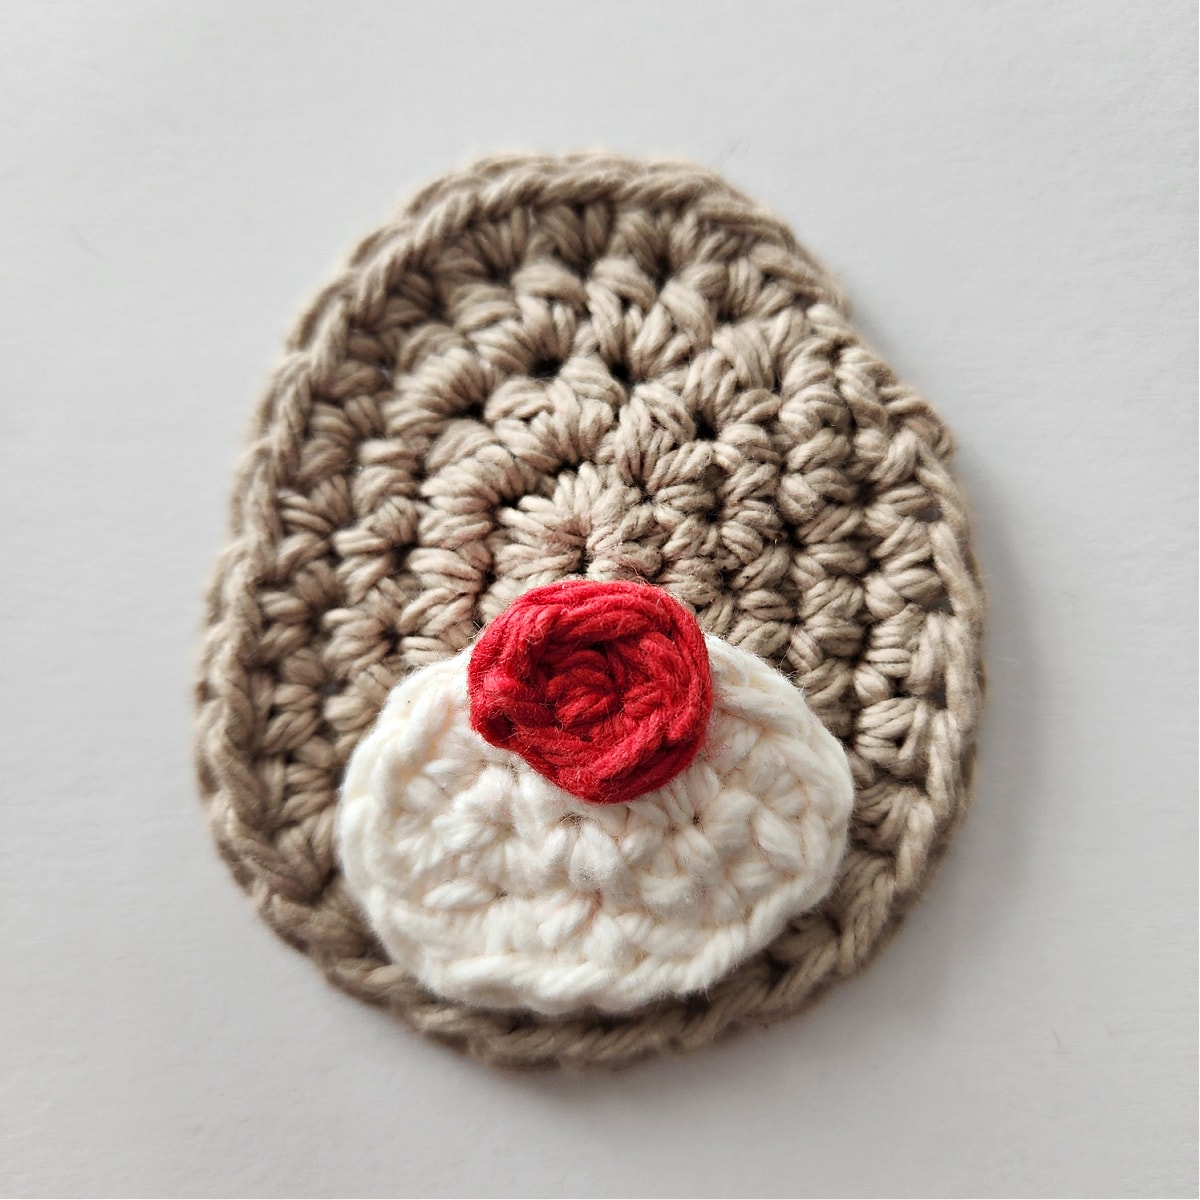 tutorial for adding muzzle and red nose on crochet reindeer candy cane holder